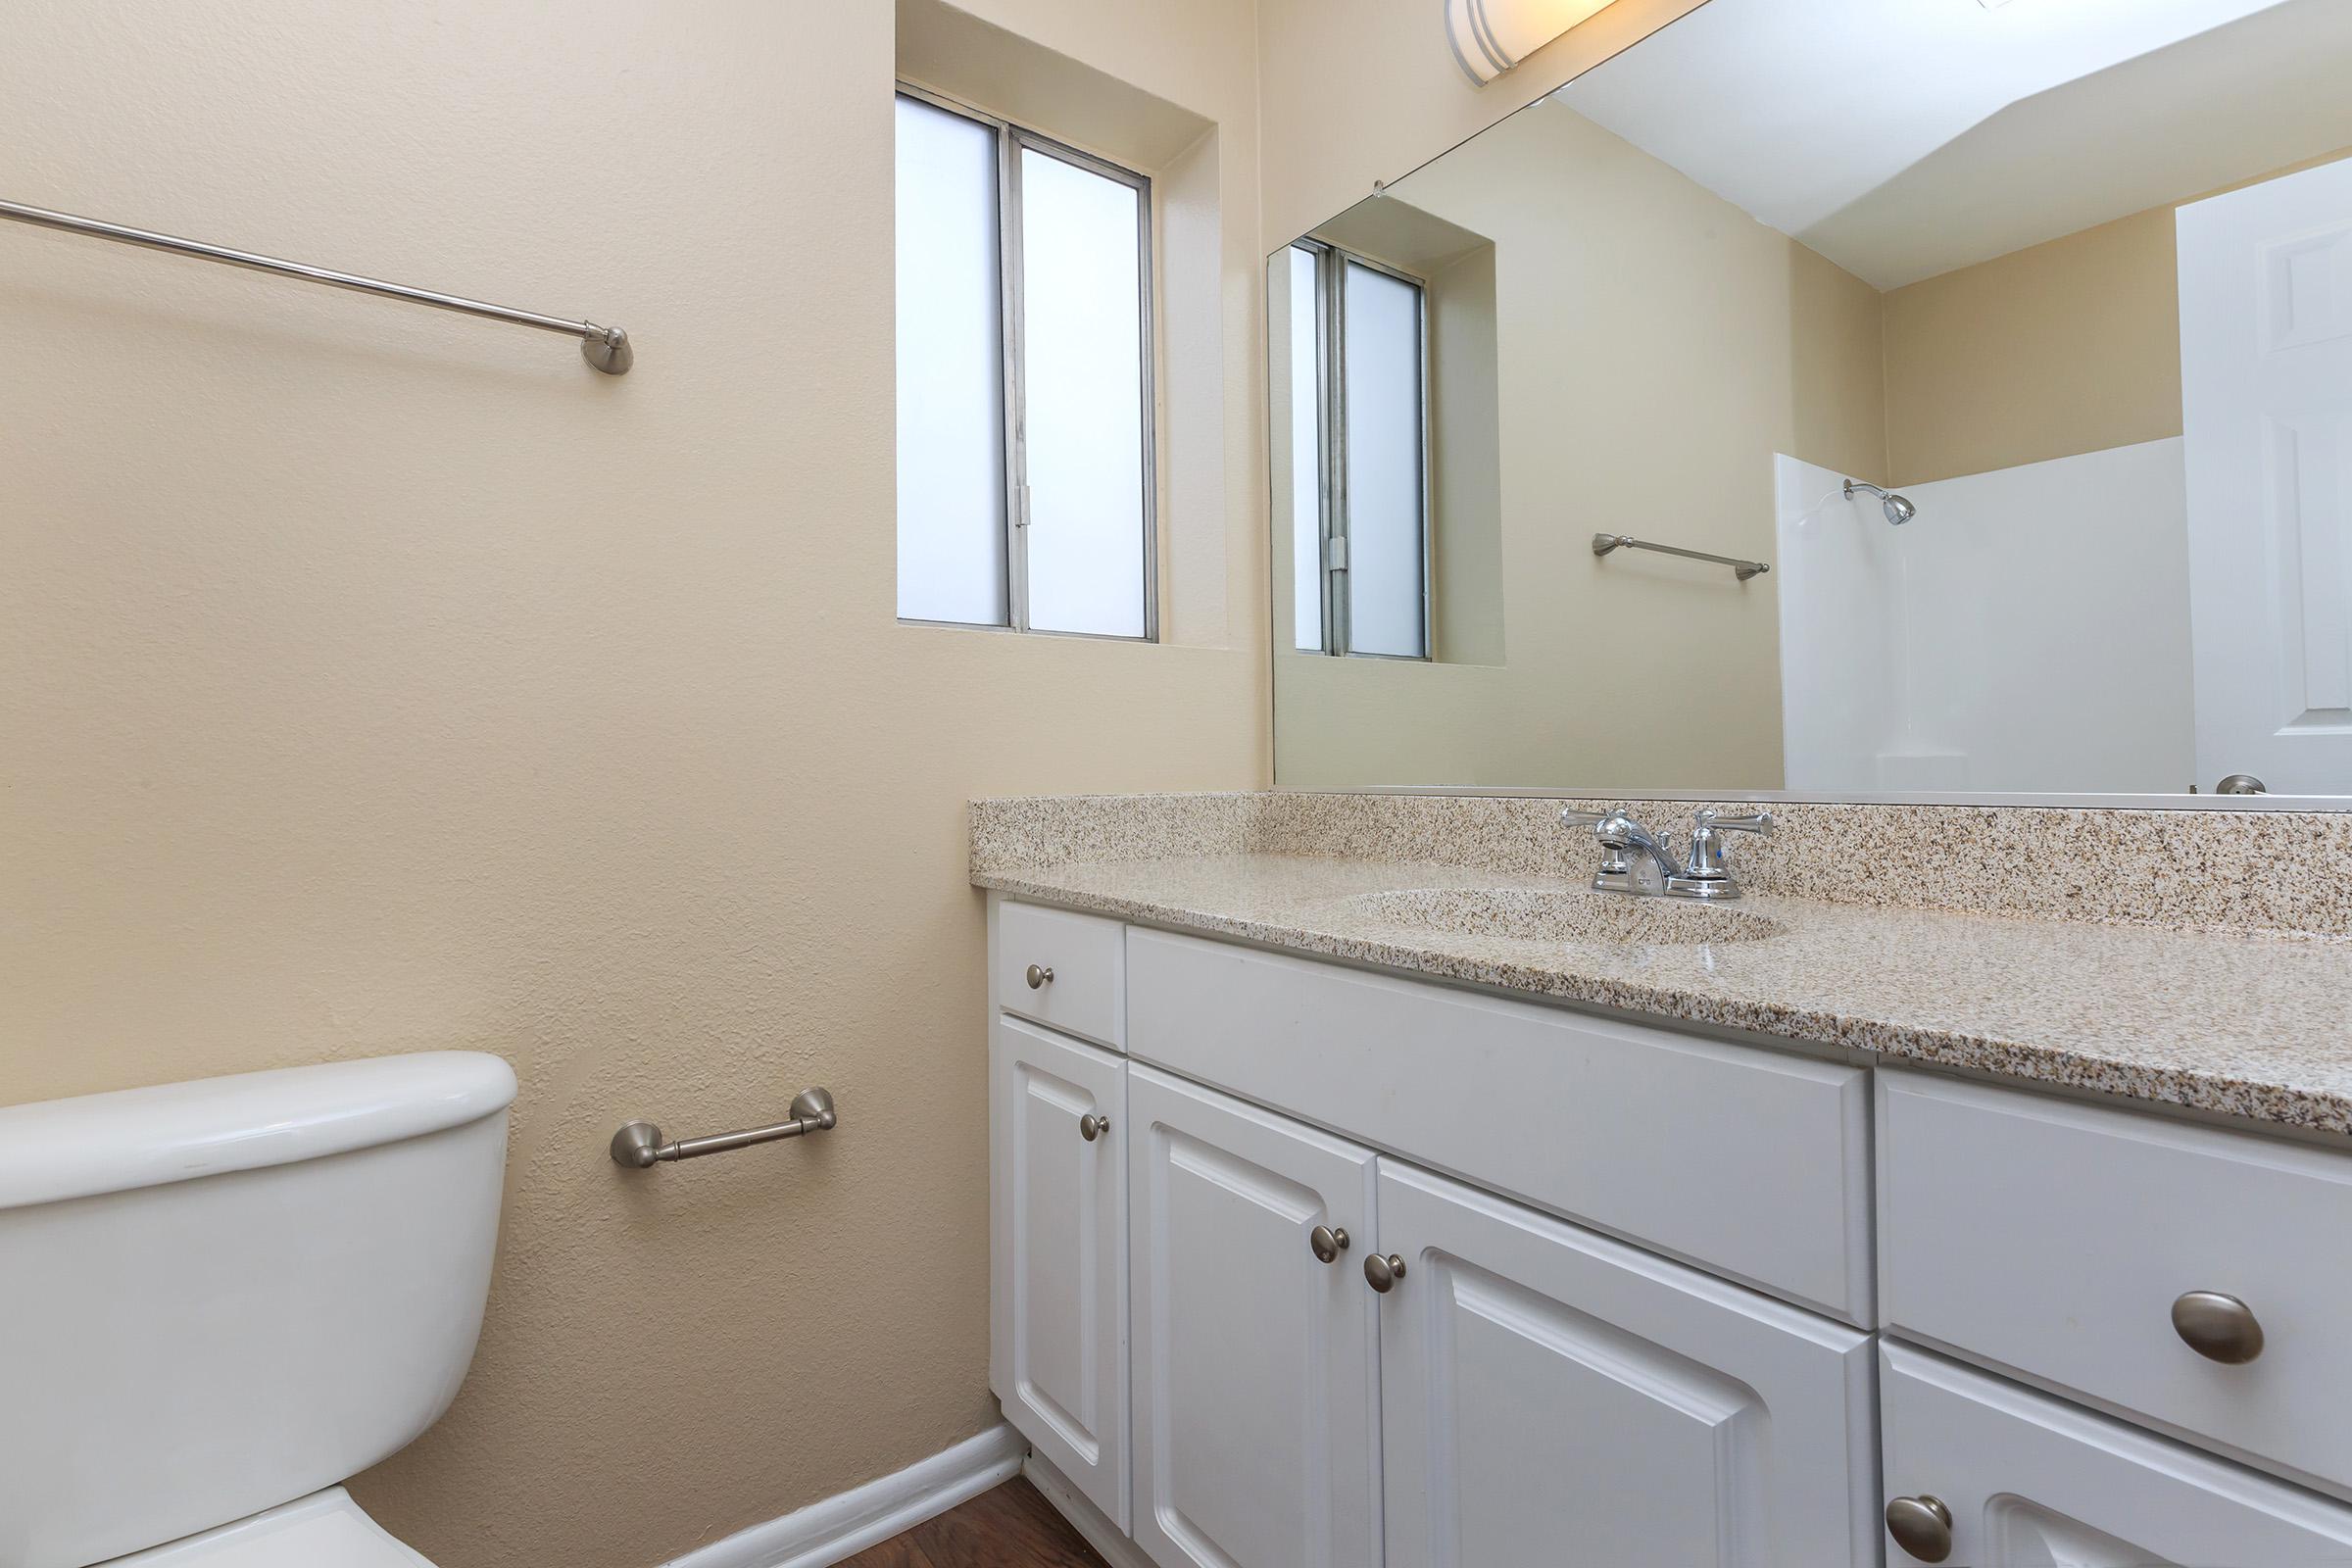 Unfurnished bathroom with wooden floors